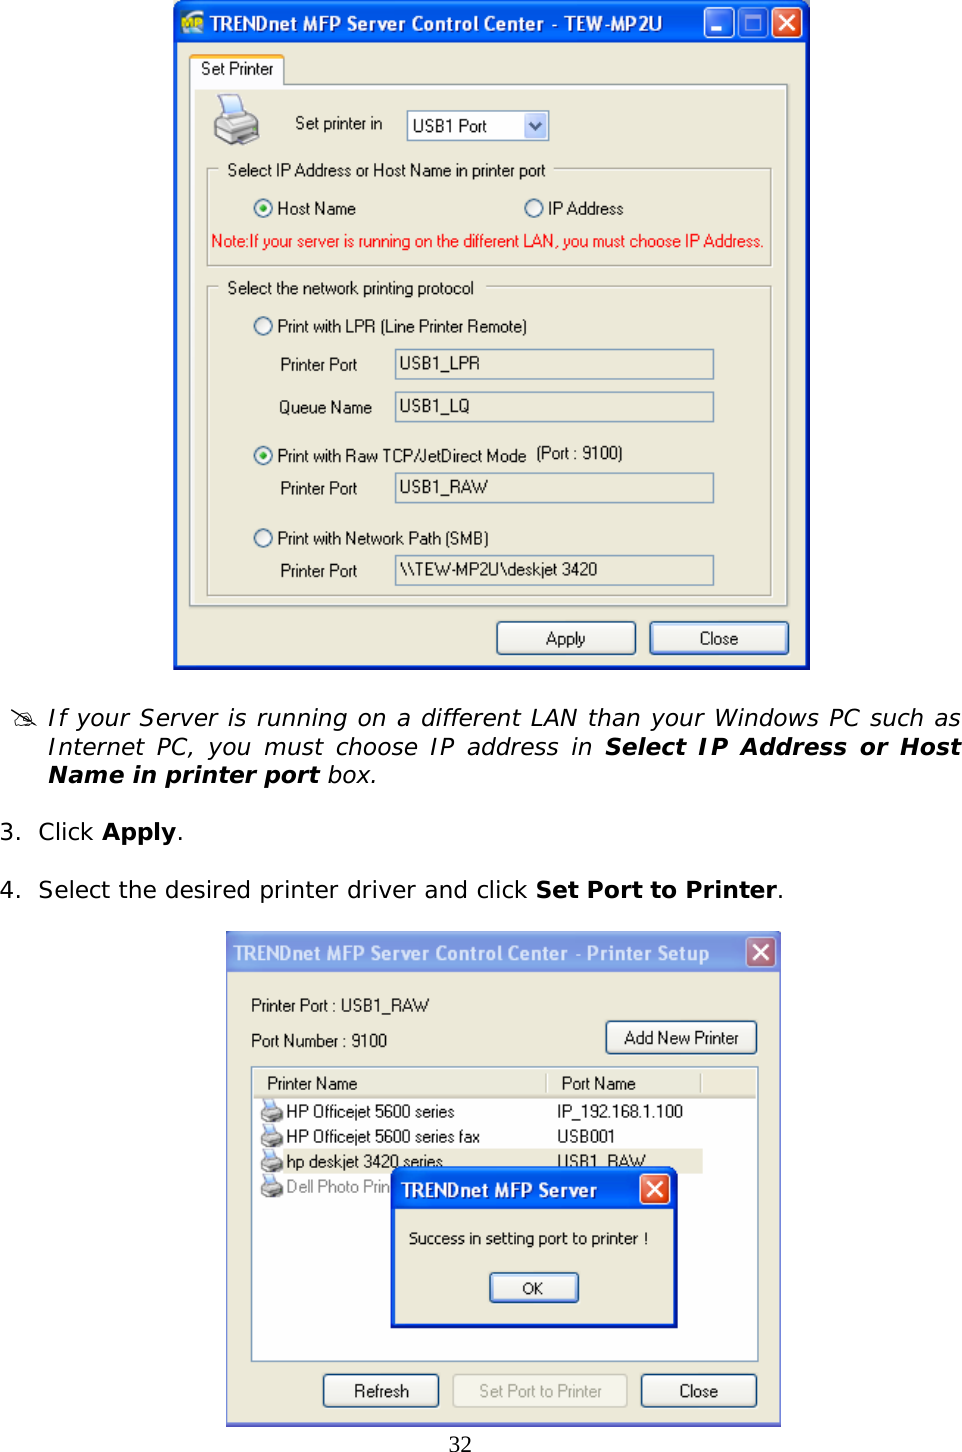     32  # If your Server is running on a different LAN than your Windows PC such as Internet PC, you must choose IP address in Select IP Address or Host Name in printer port box.  3. Click Apply.  4. Select the desired printer driver and click Set Port to Printer.   